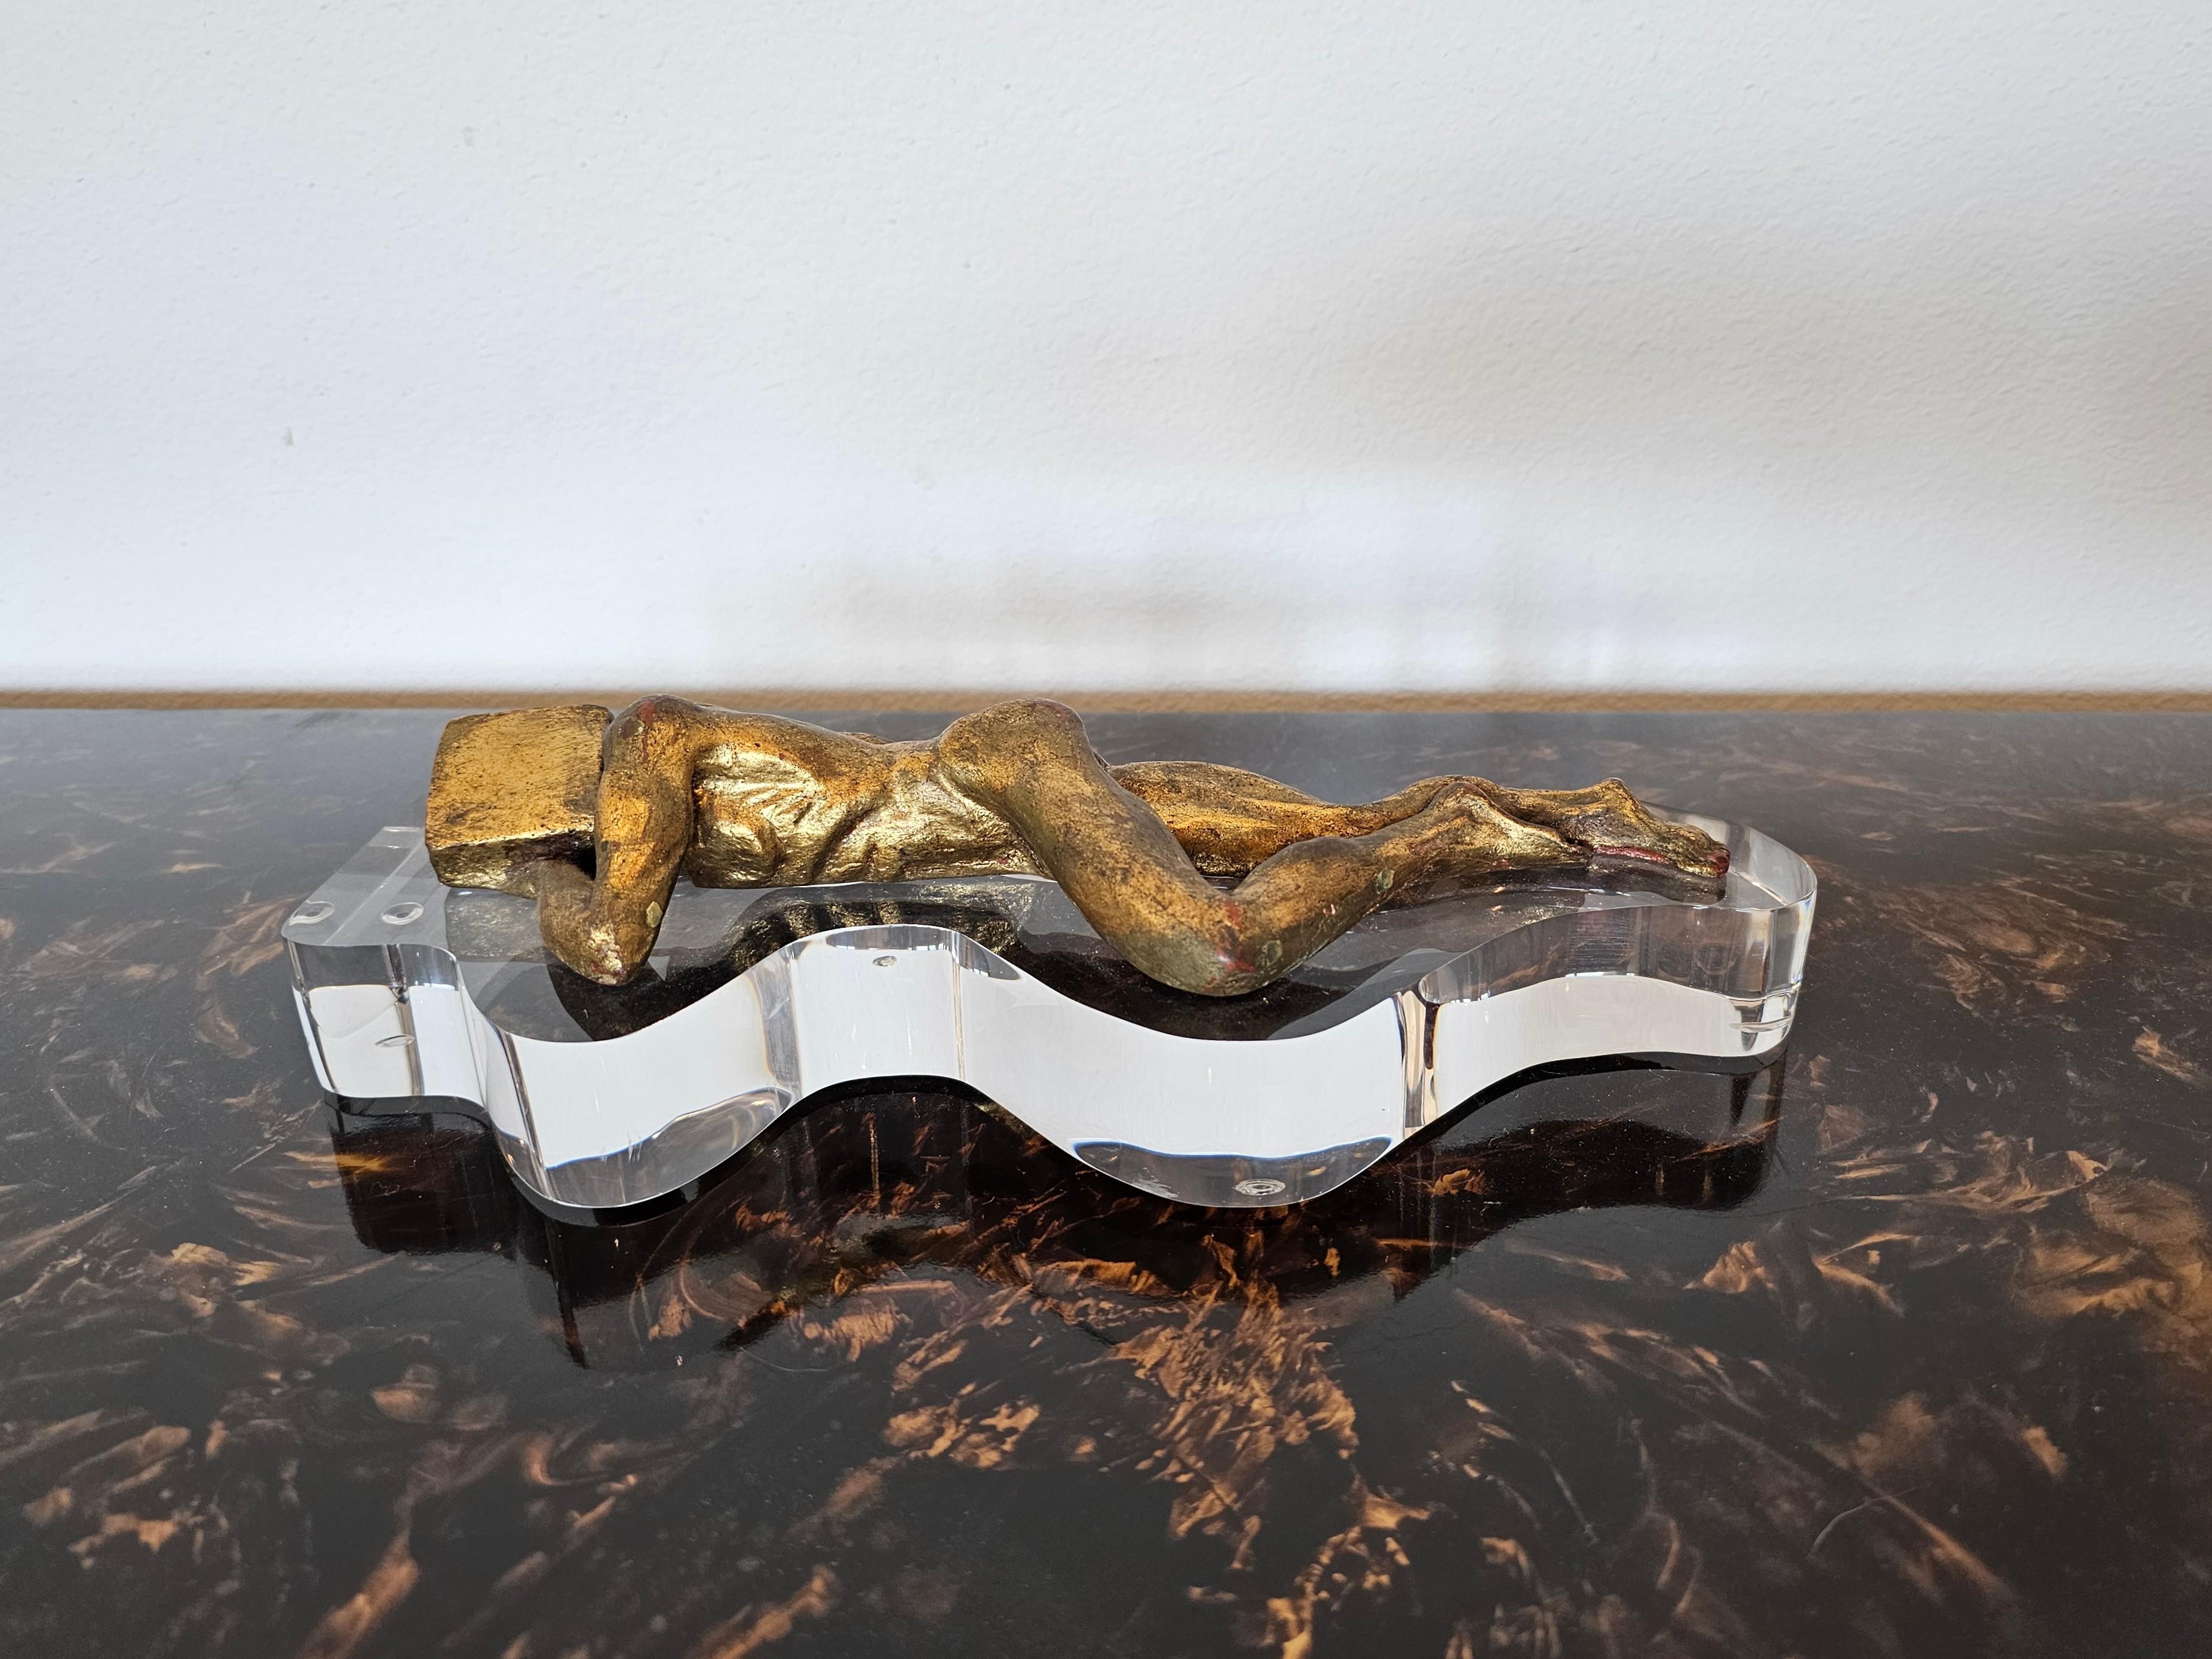 A fabulous mid-century modern hand carved giltwood sculpture, possibly American, depicting a surrealist nude figure of a man with block head lying in a prostrate position, mounted on a conforming clear lucite base. circa 1960

Dimensions: